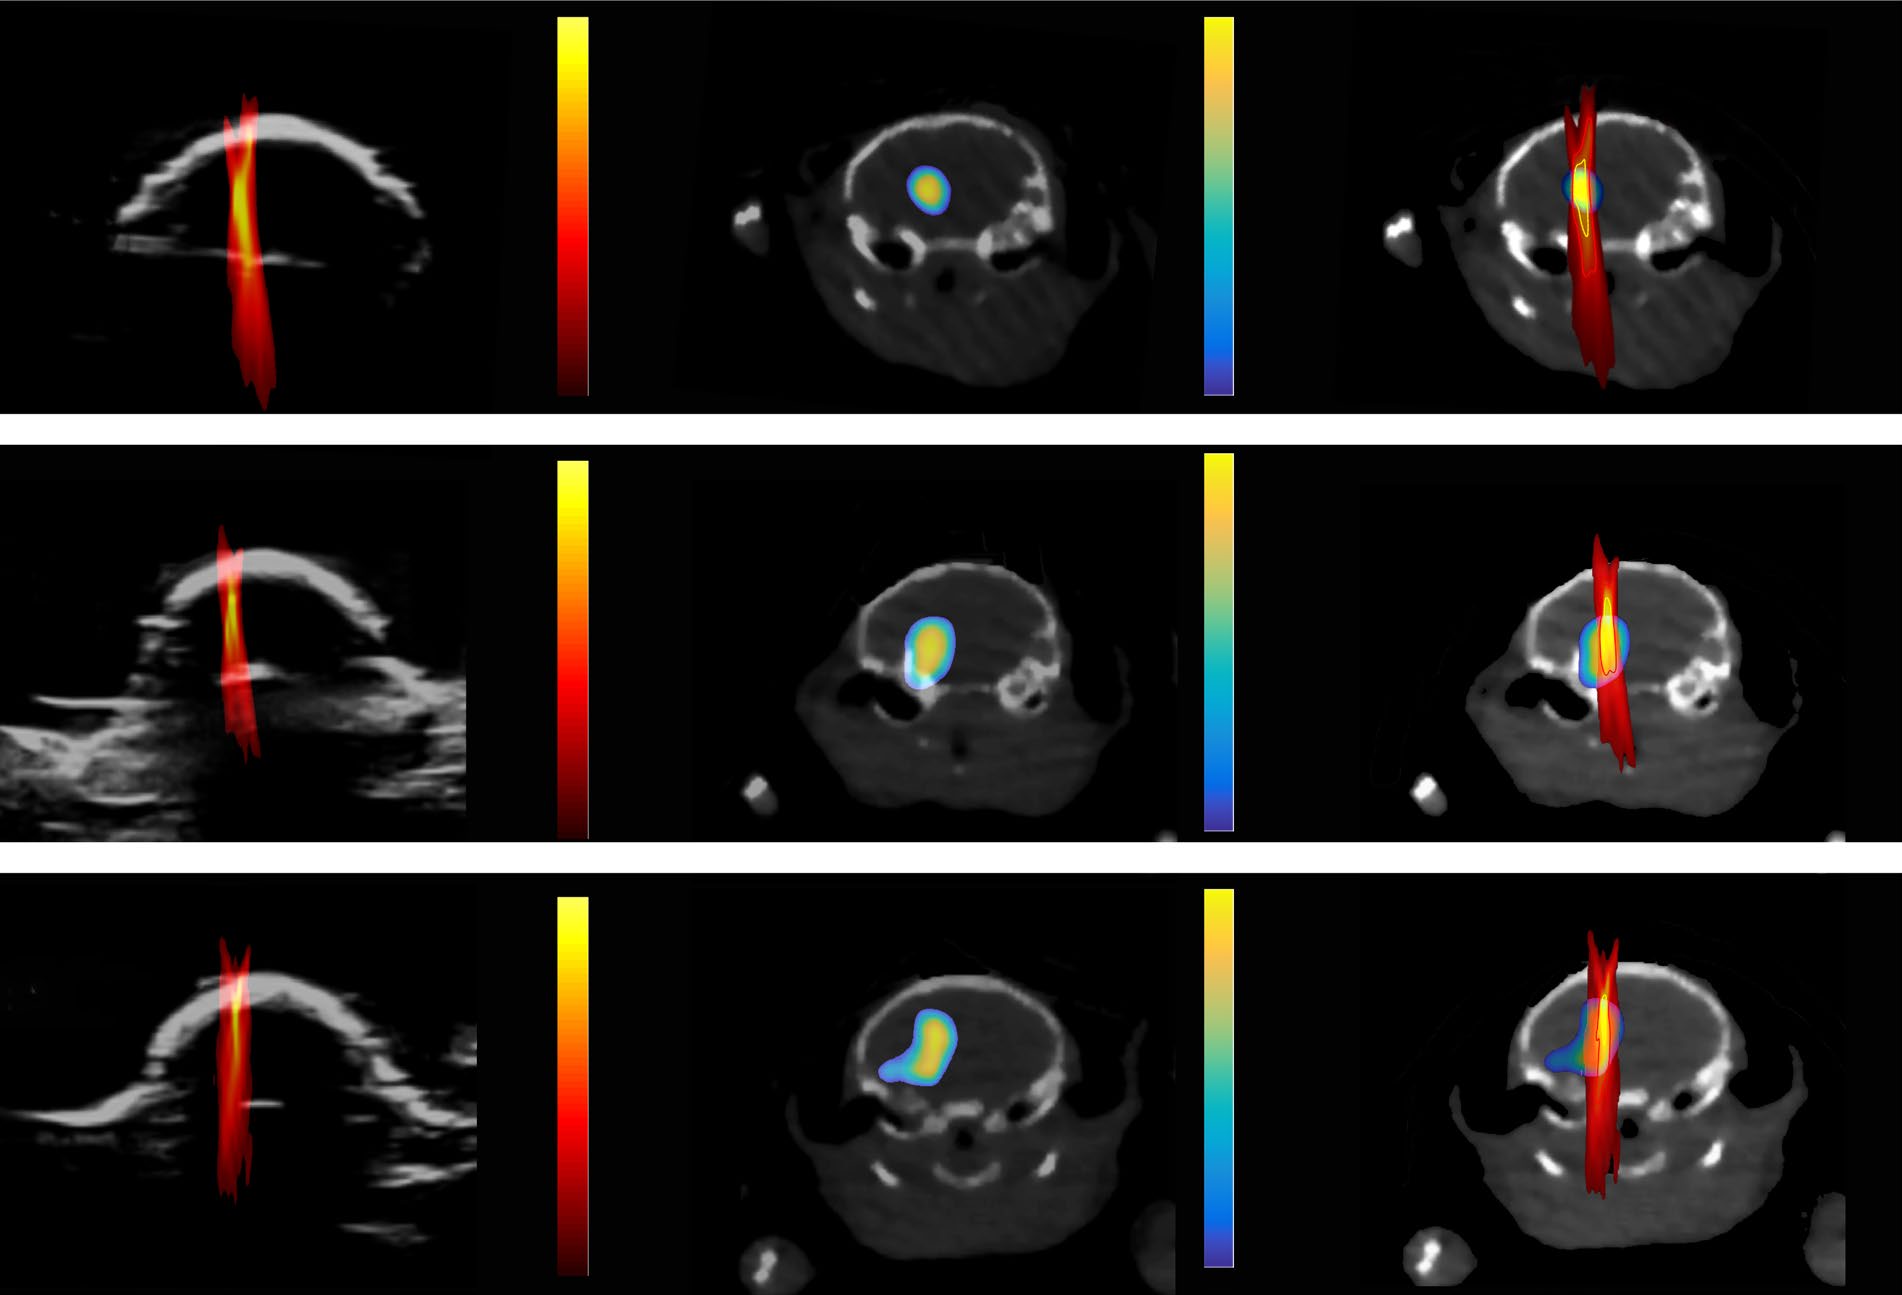 PCI images compared to PET/CT images showing location and dose of drug in a mouse brain